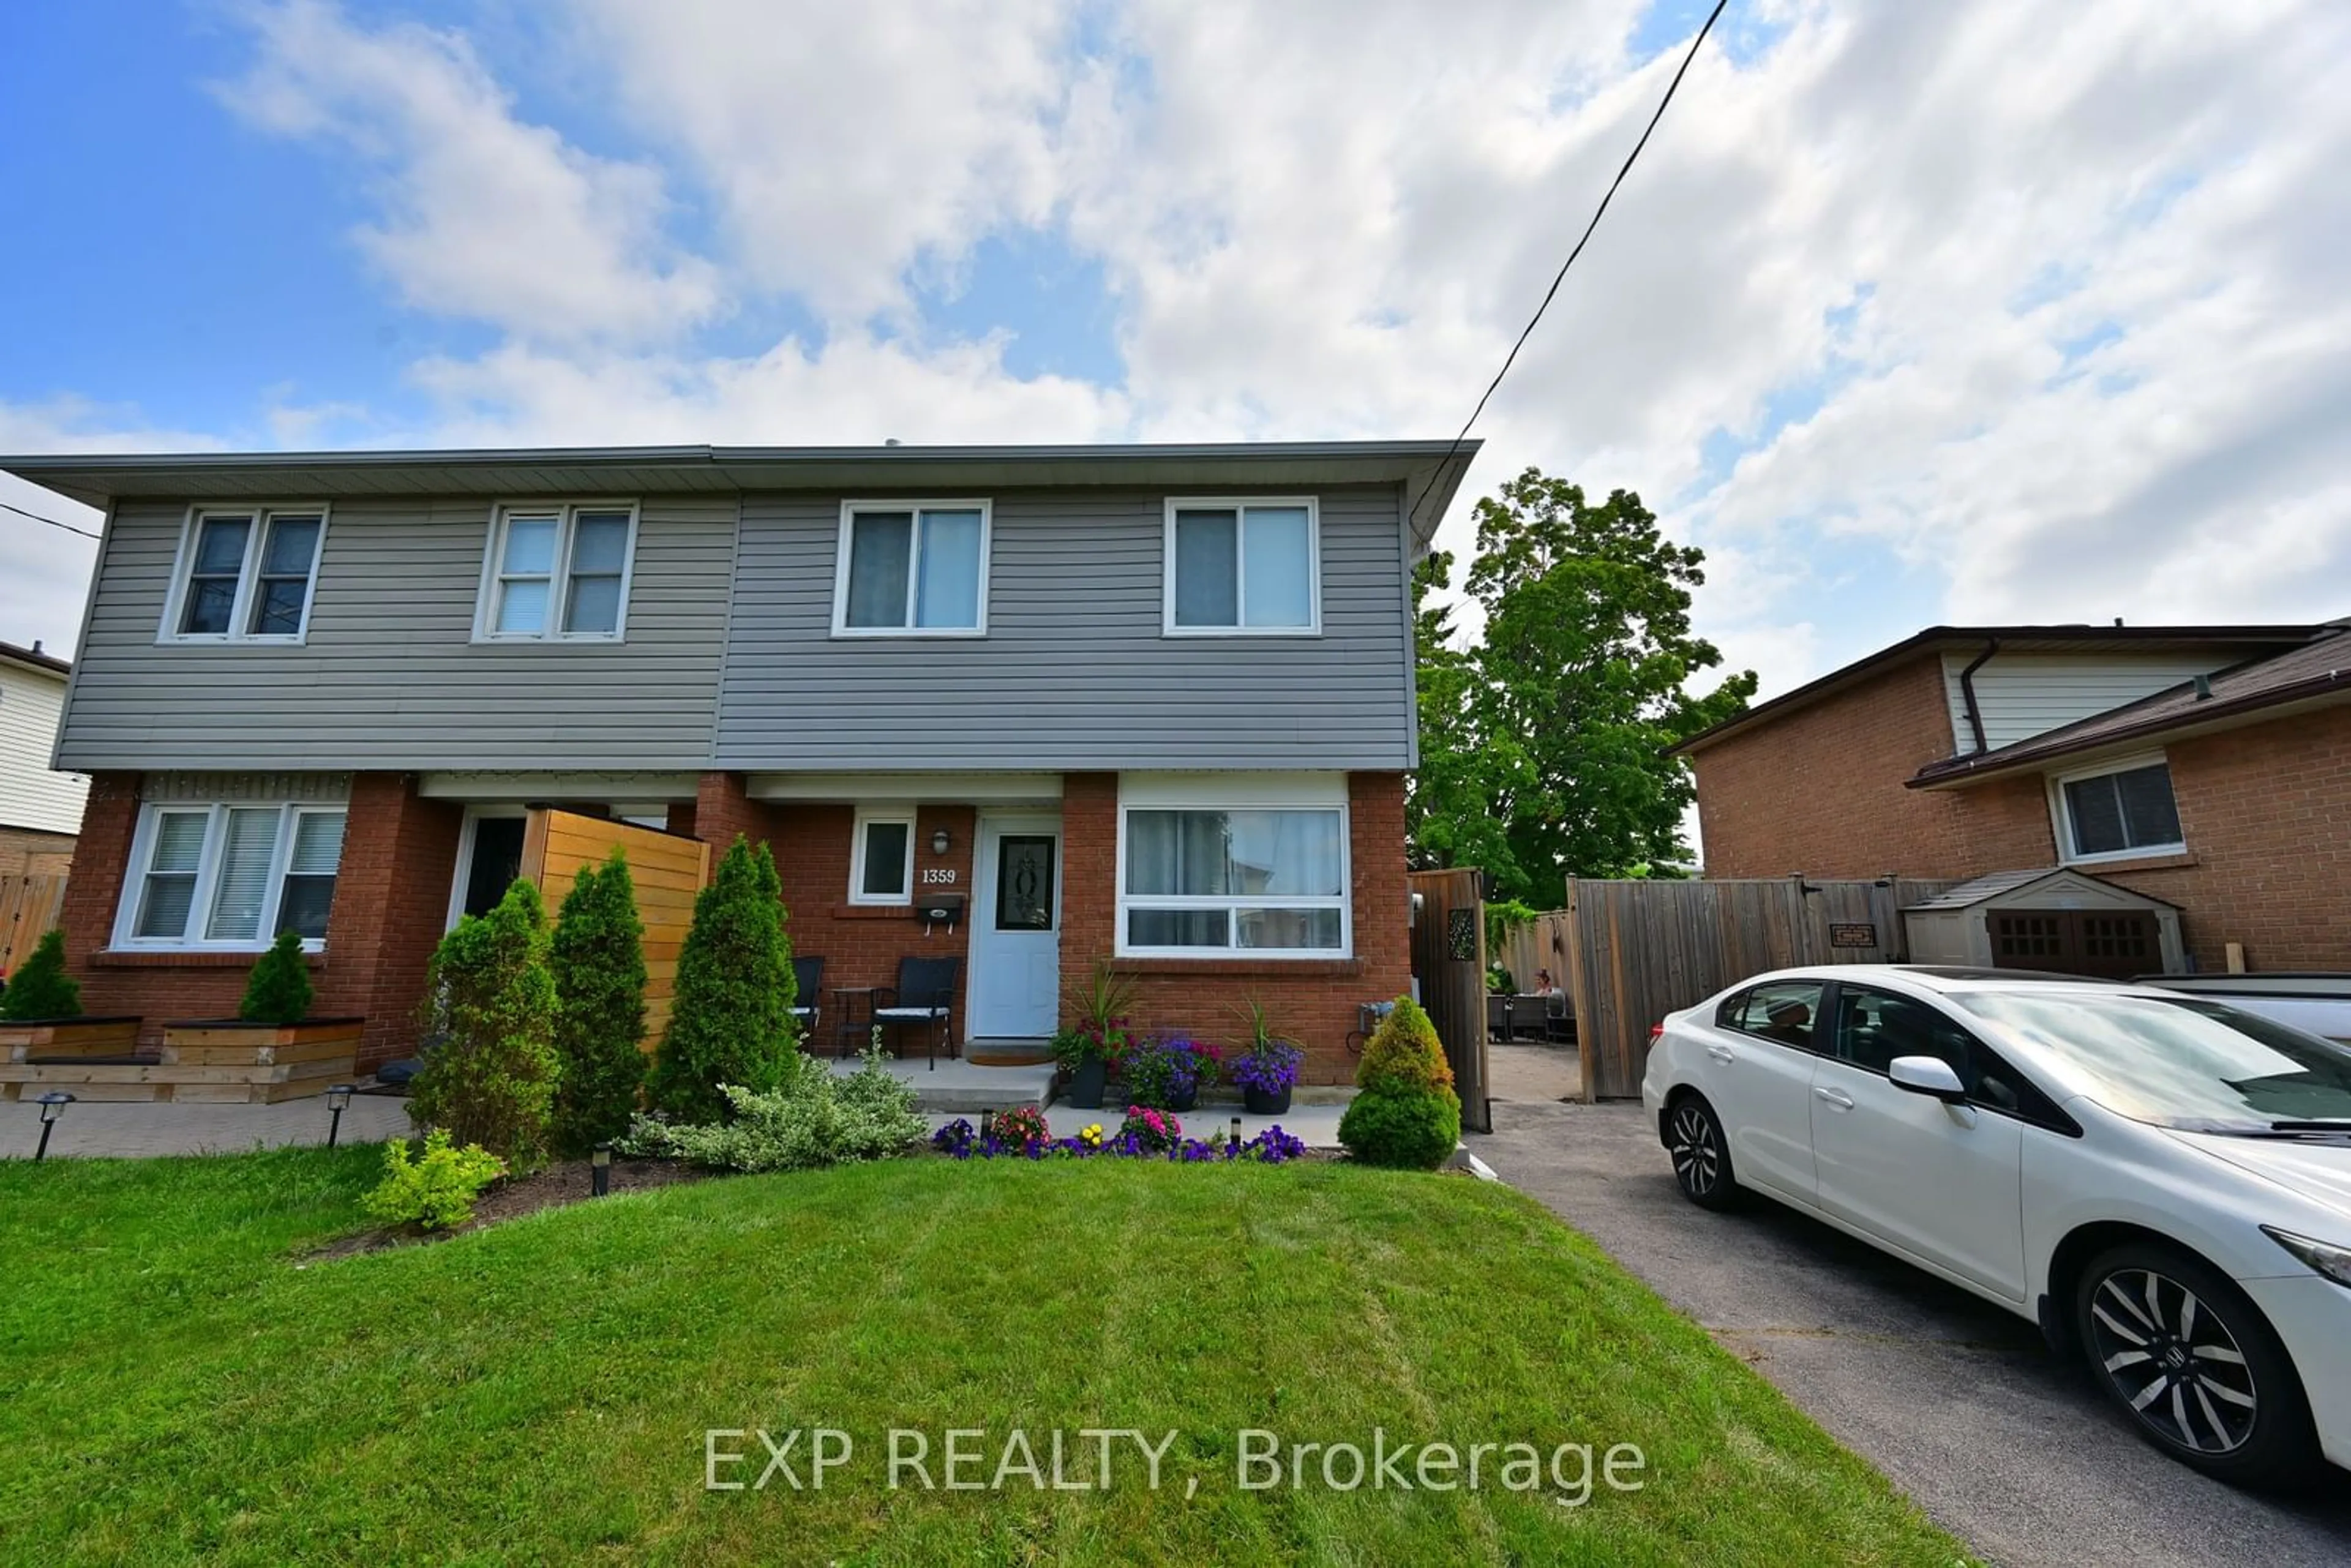 Frontside or backside of a home for 1359 Tremblay St, Oshawa Ontario L1J 3X4